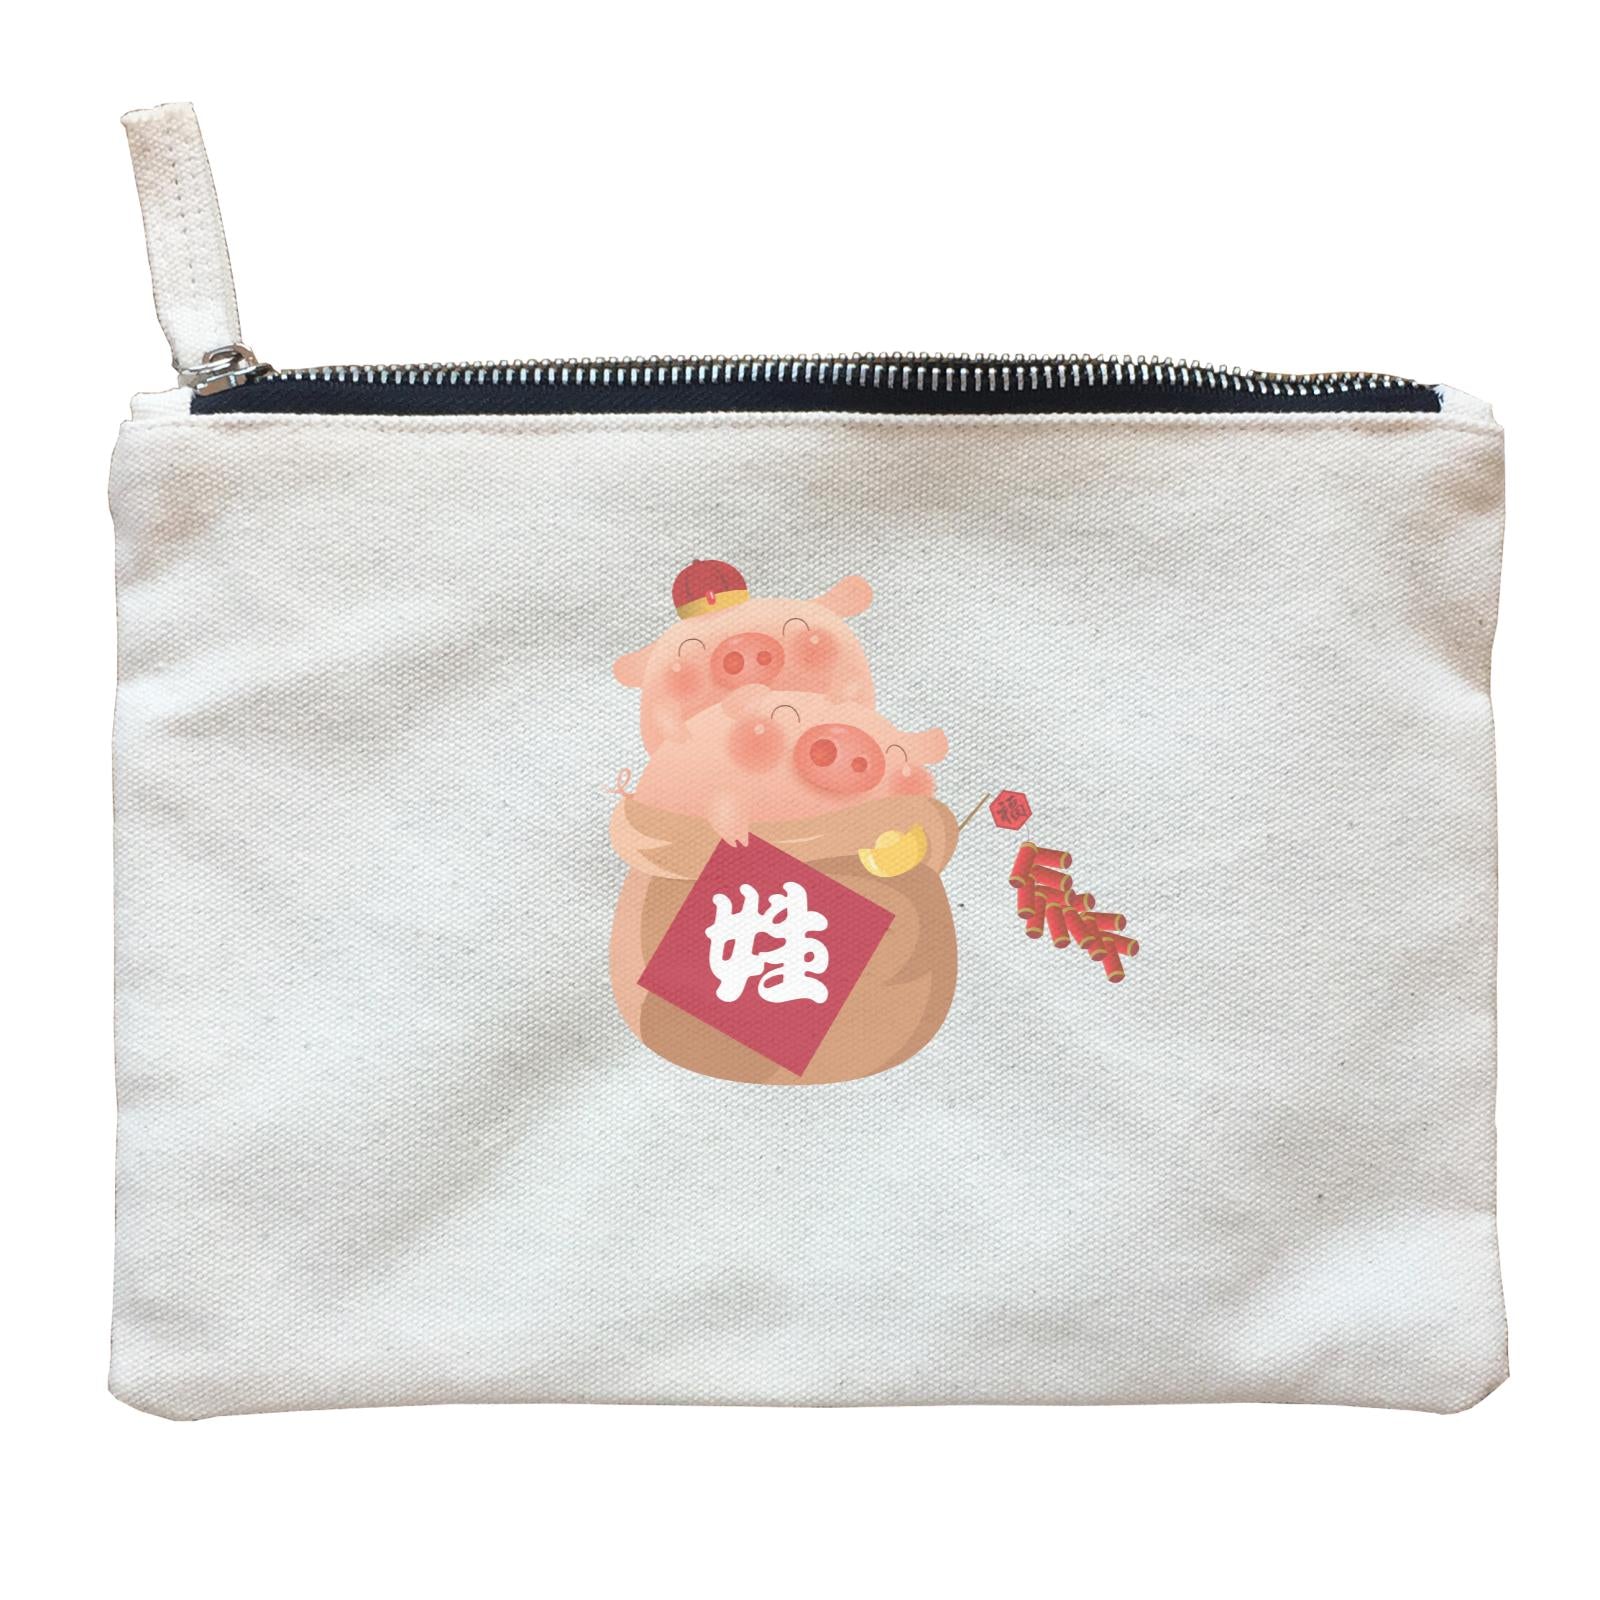 Chinese New Year Pig Group in Bag Add Surname Zipper Pouch